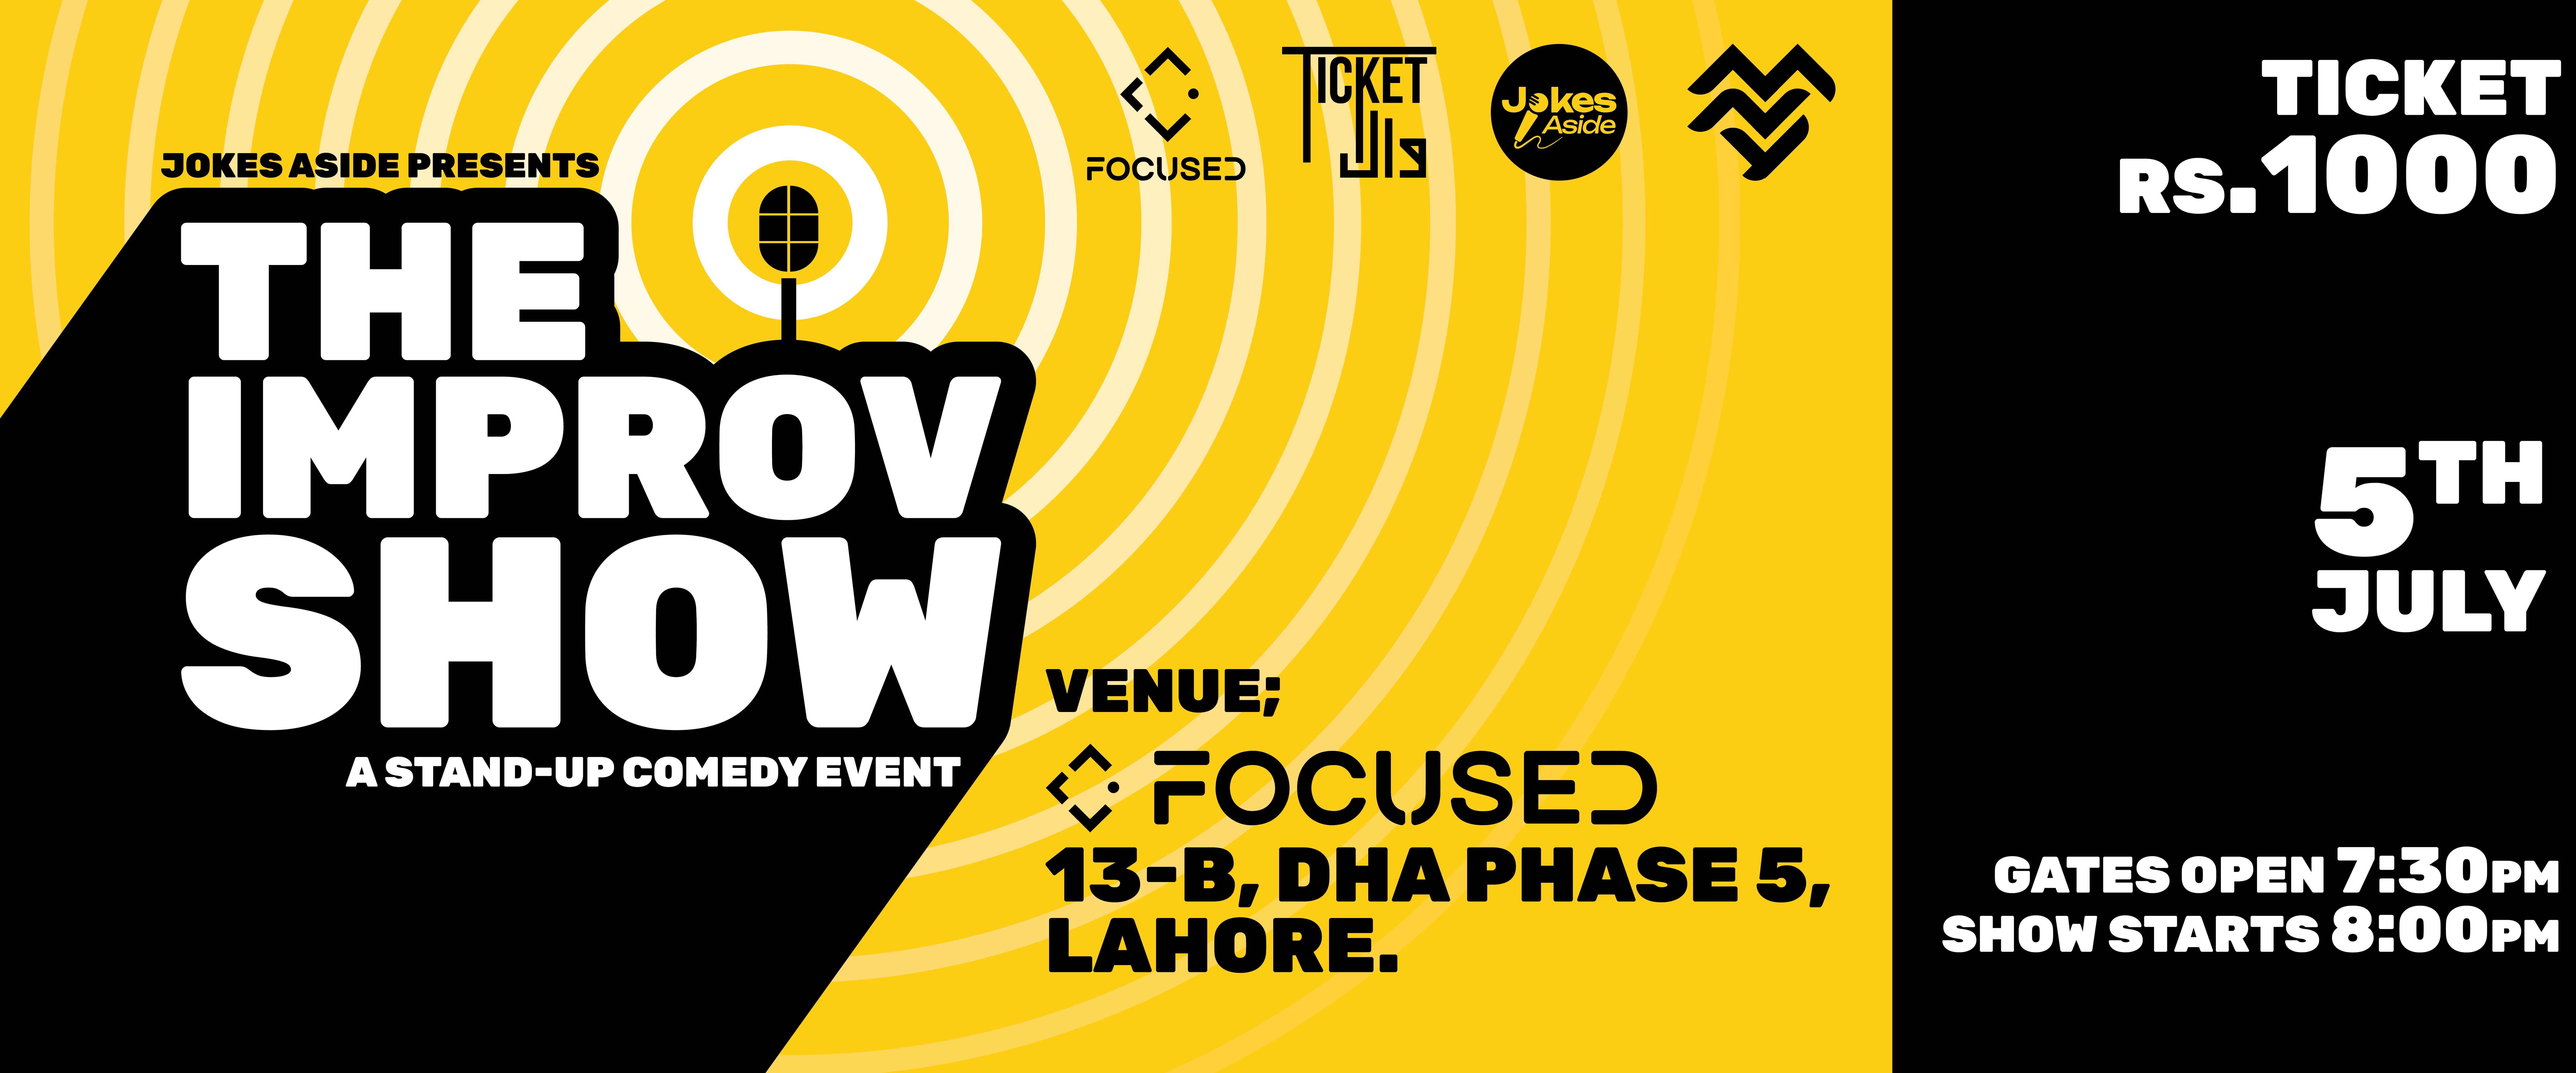 The Improv Show (5th July